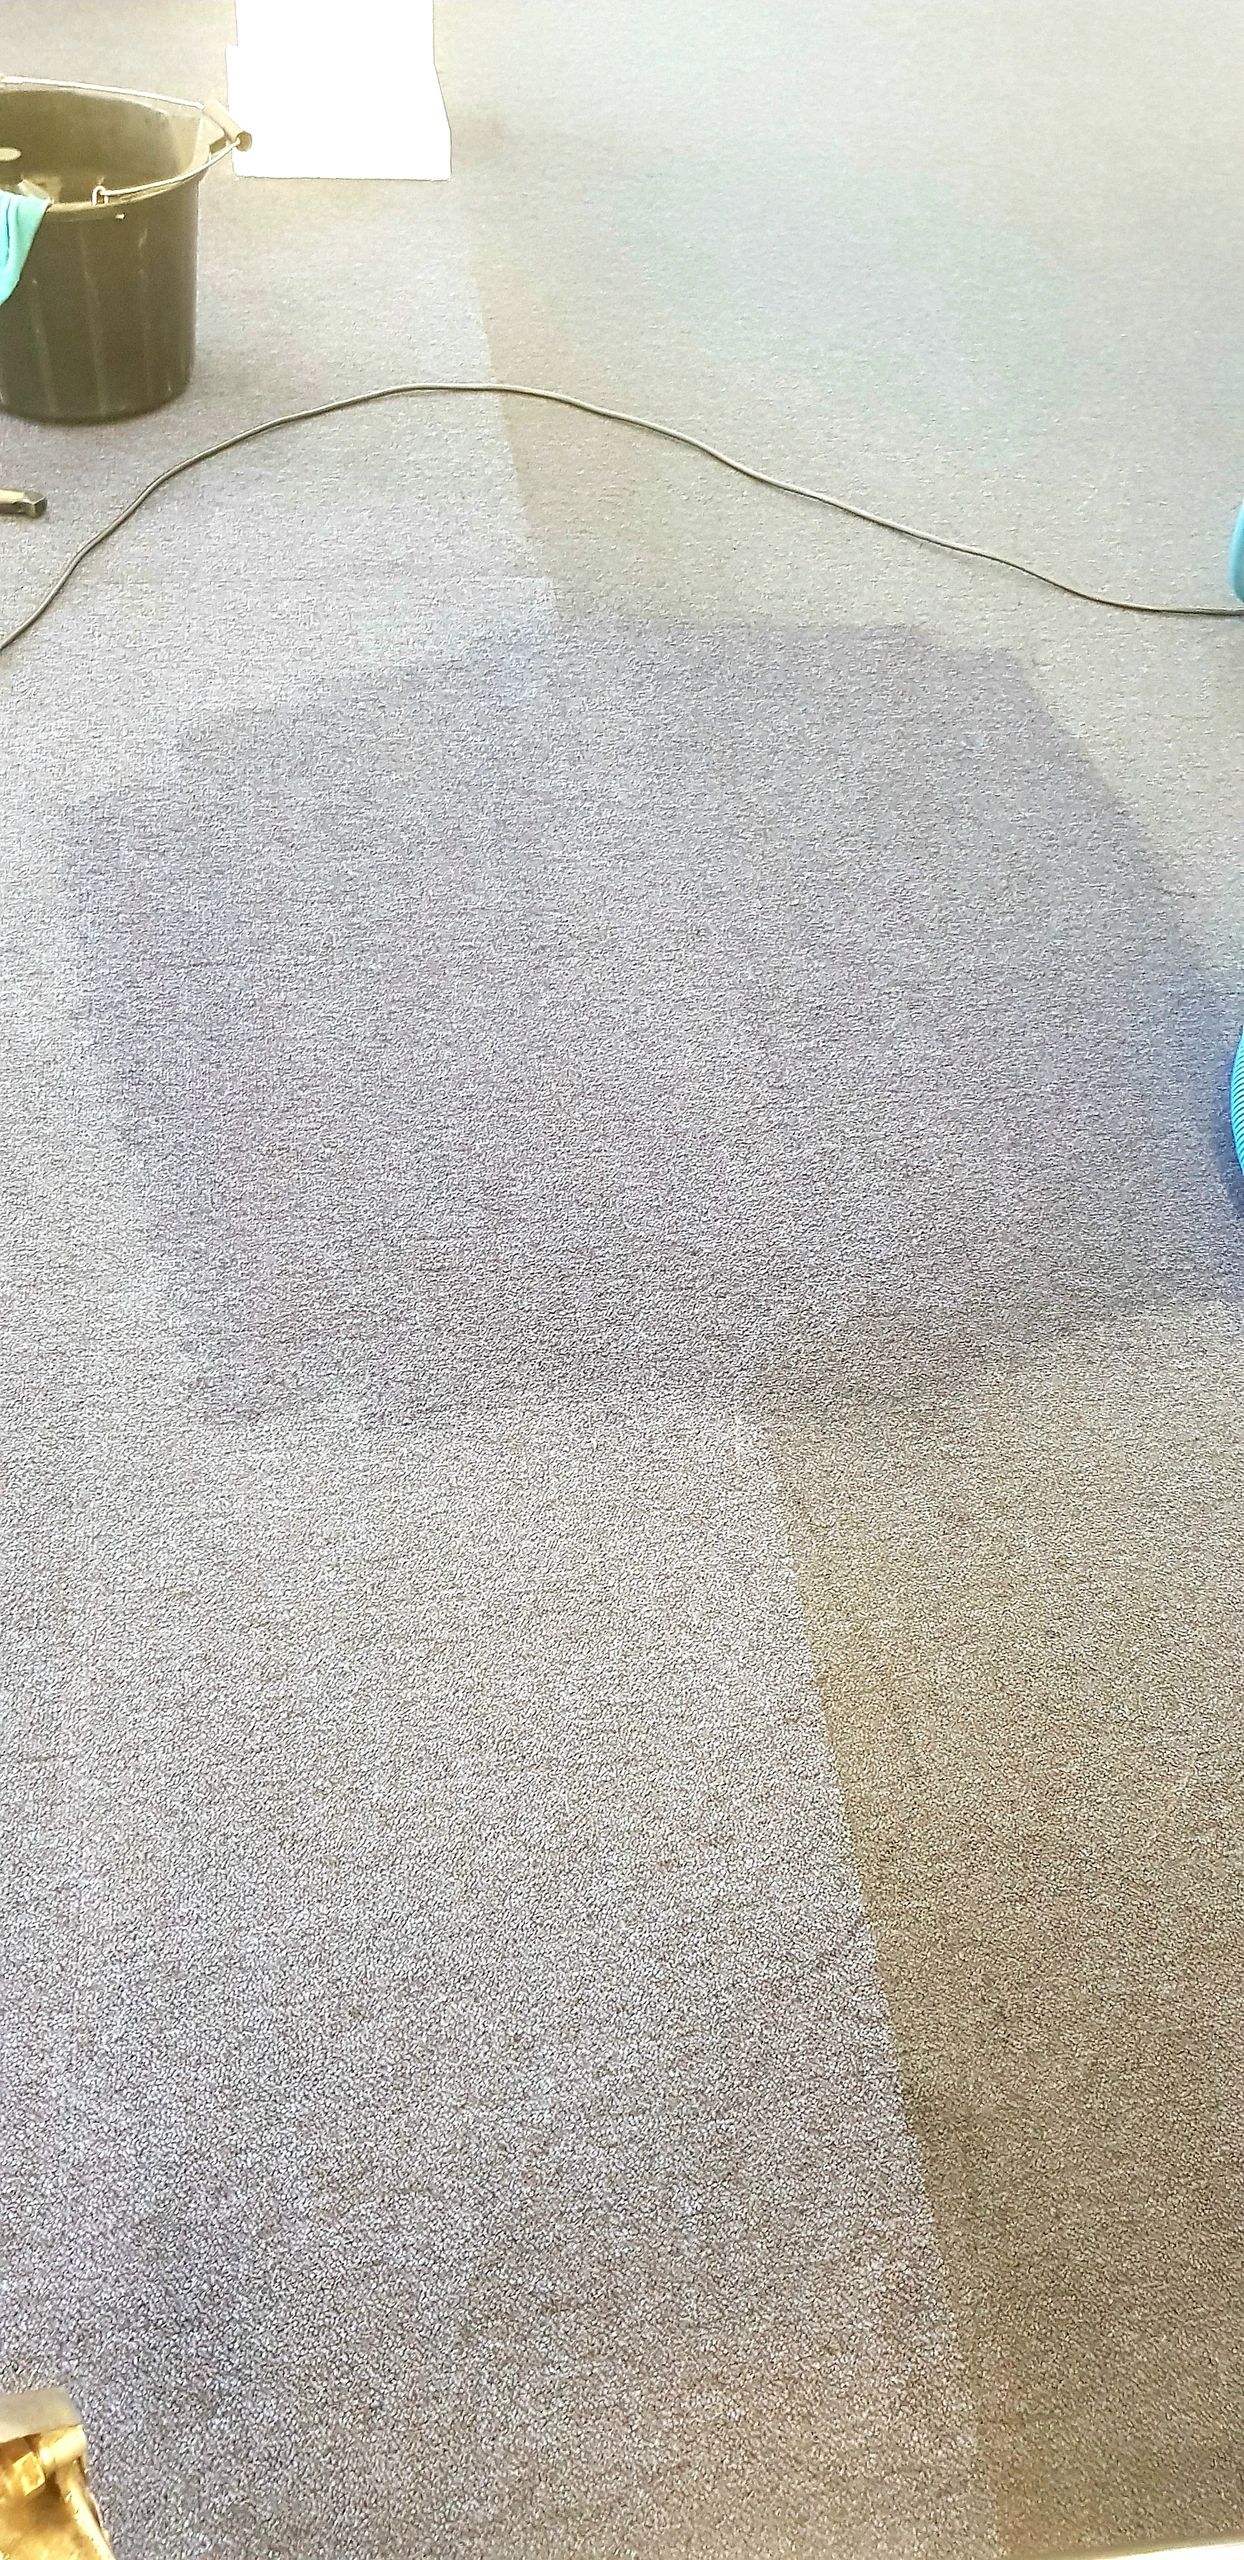 Patch test prior to a deep clean on an office carpet 